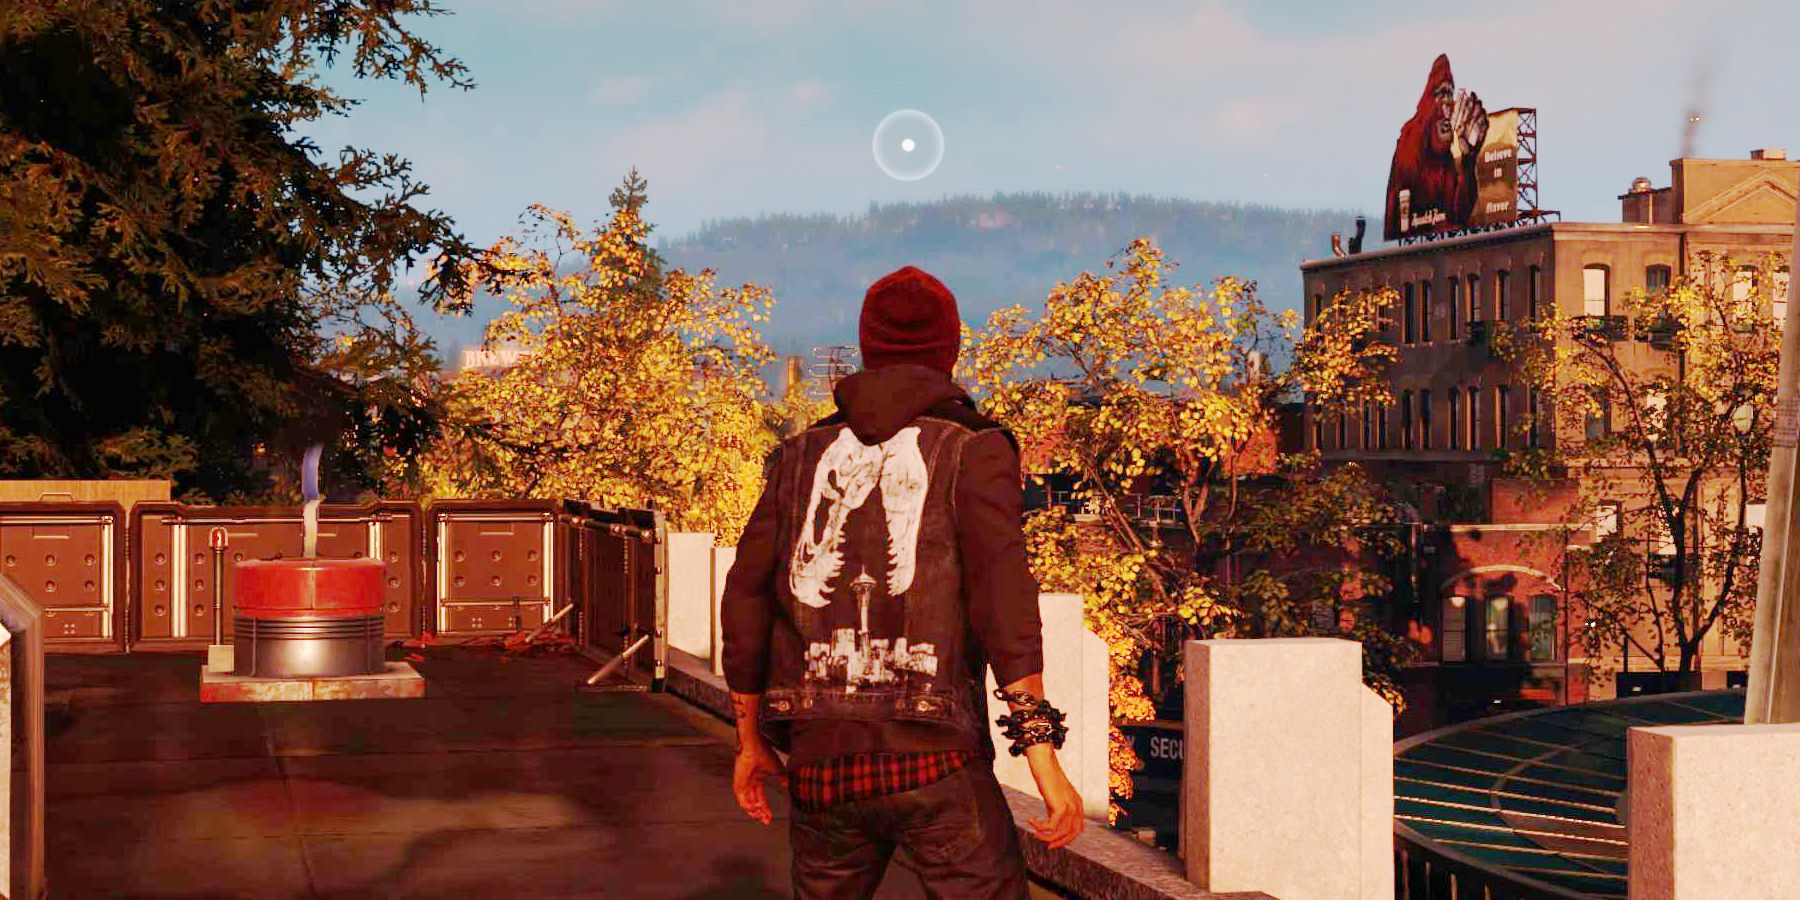 Infamous Delsin standing on top of a city building